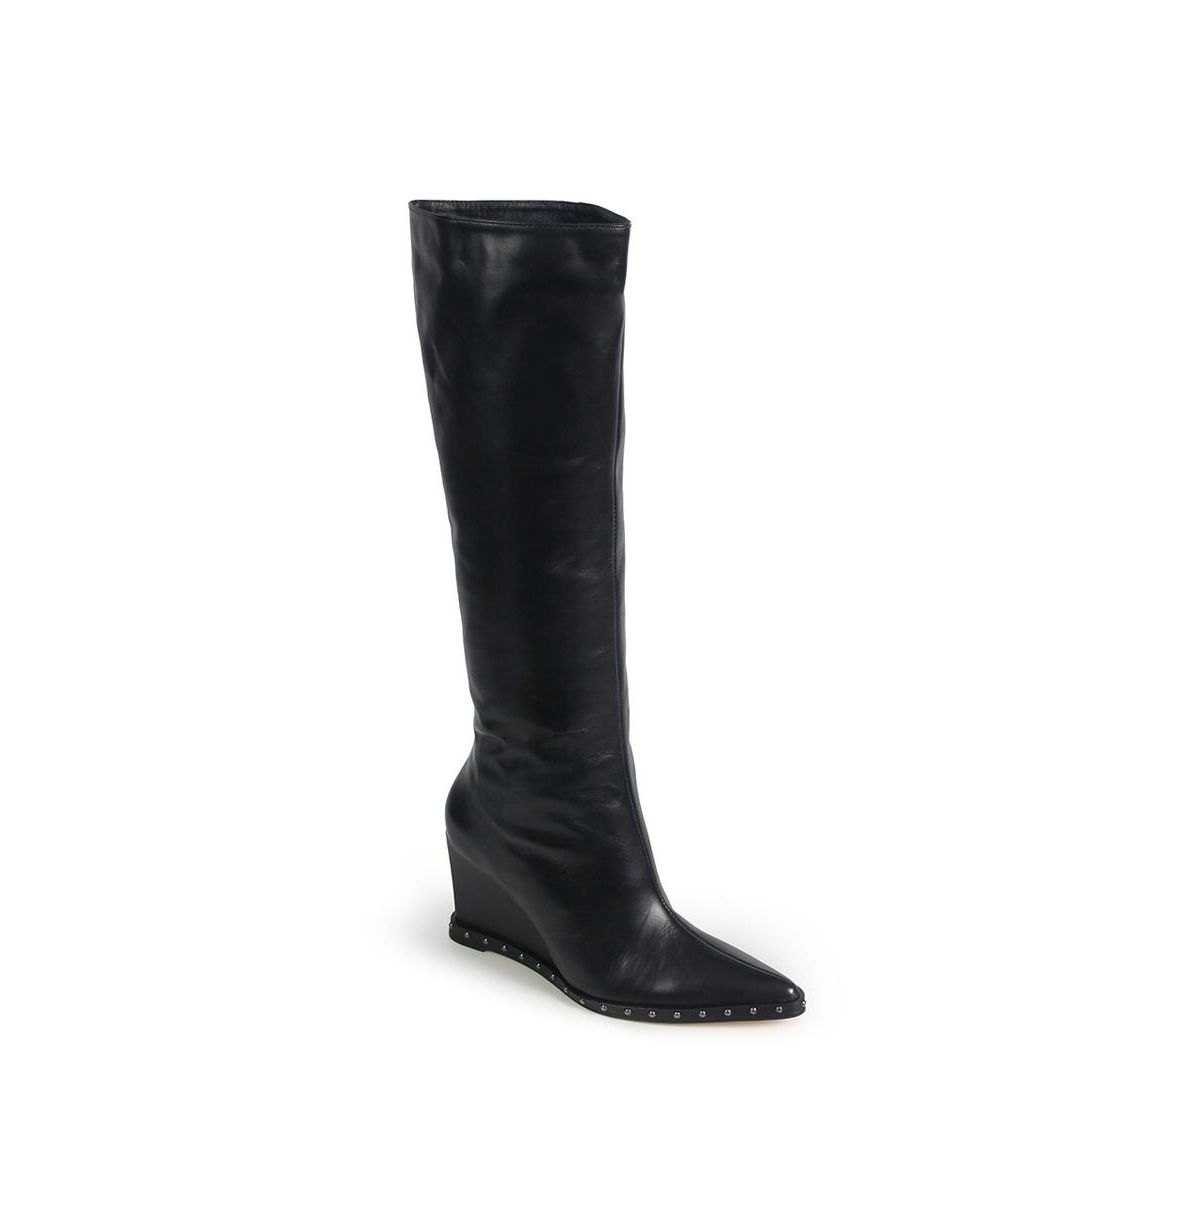 Shoes Women's Aragon Pointed-Toe Wedge Dress Boots - Black